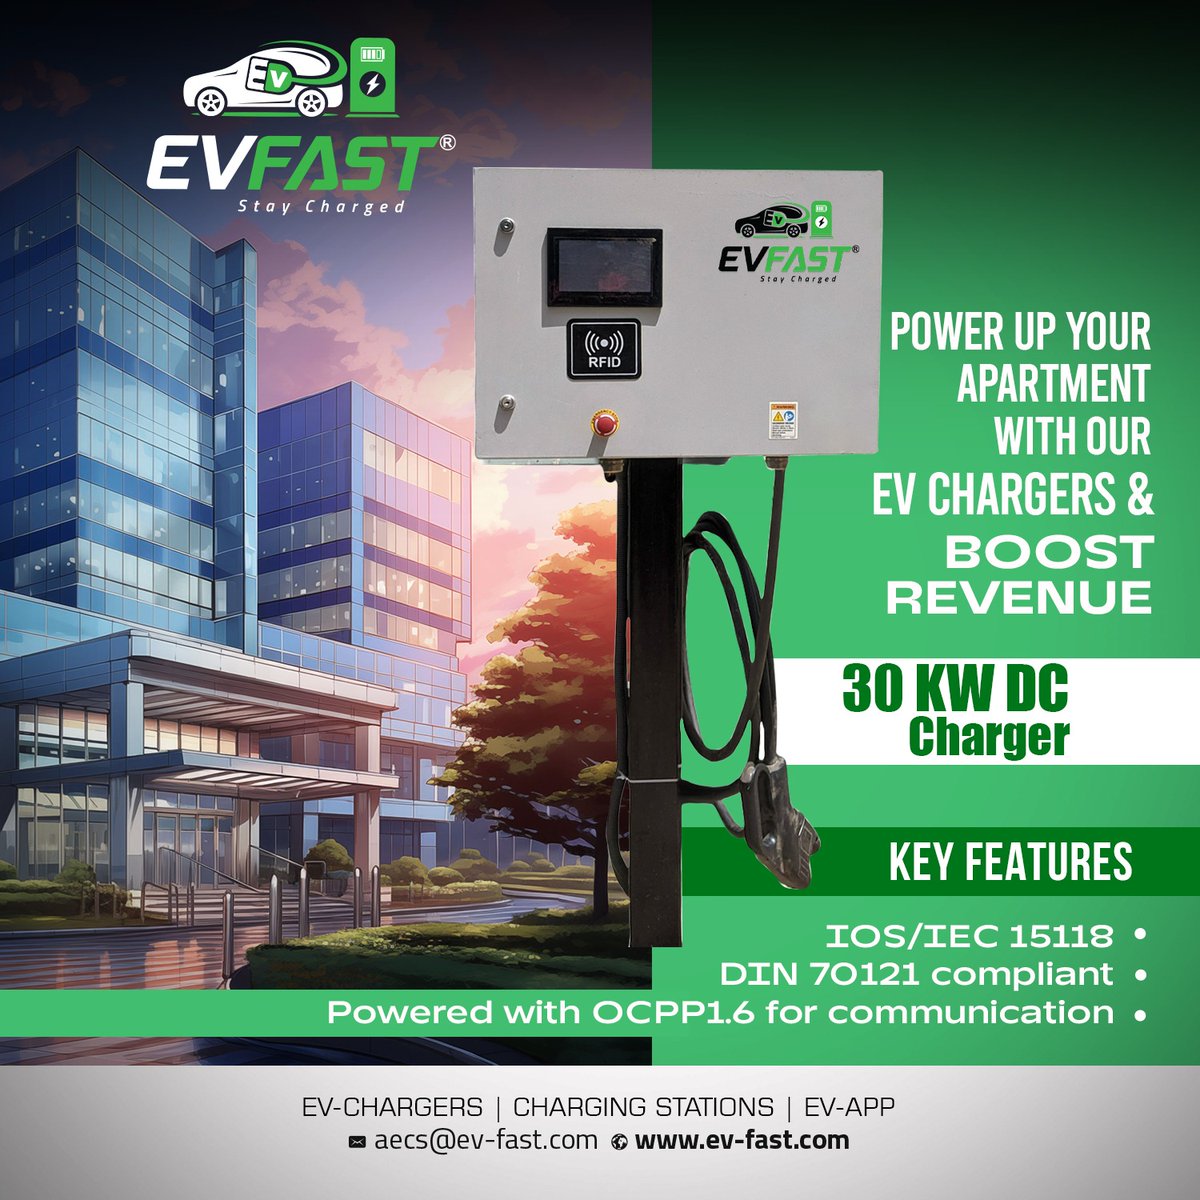 Transform your apartment into a powerhouse with our cutting-edge charger and watch your revenue soar!

Power up with ease and efficiency.👍

#evfast #EVFastcharging #portablecharger #PortablePower #portablecharger #portablepowerstation #ev #electricvehiclecharger #fastcharger